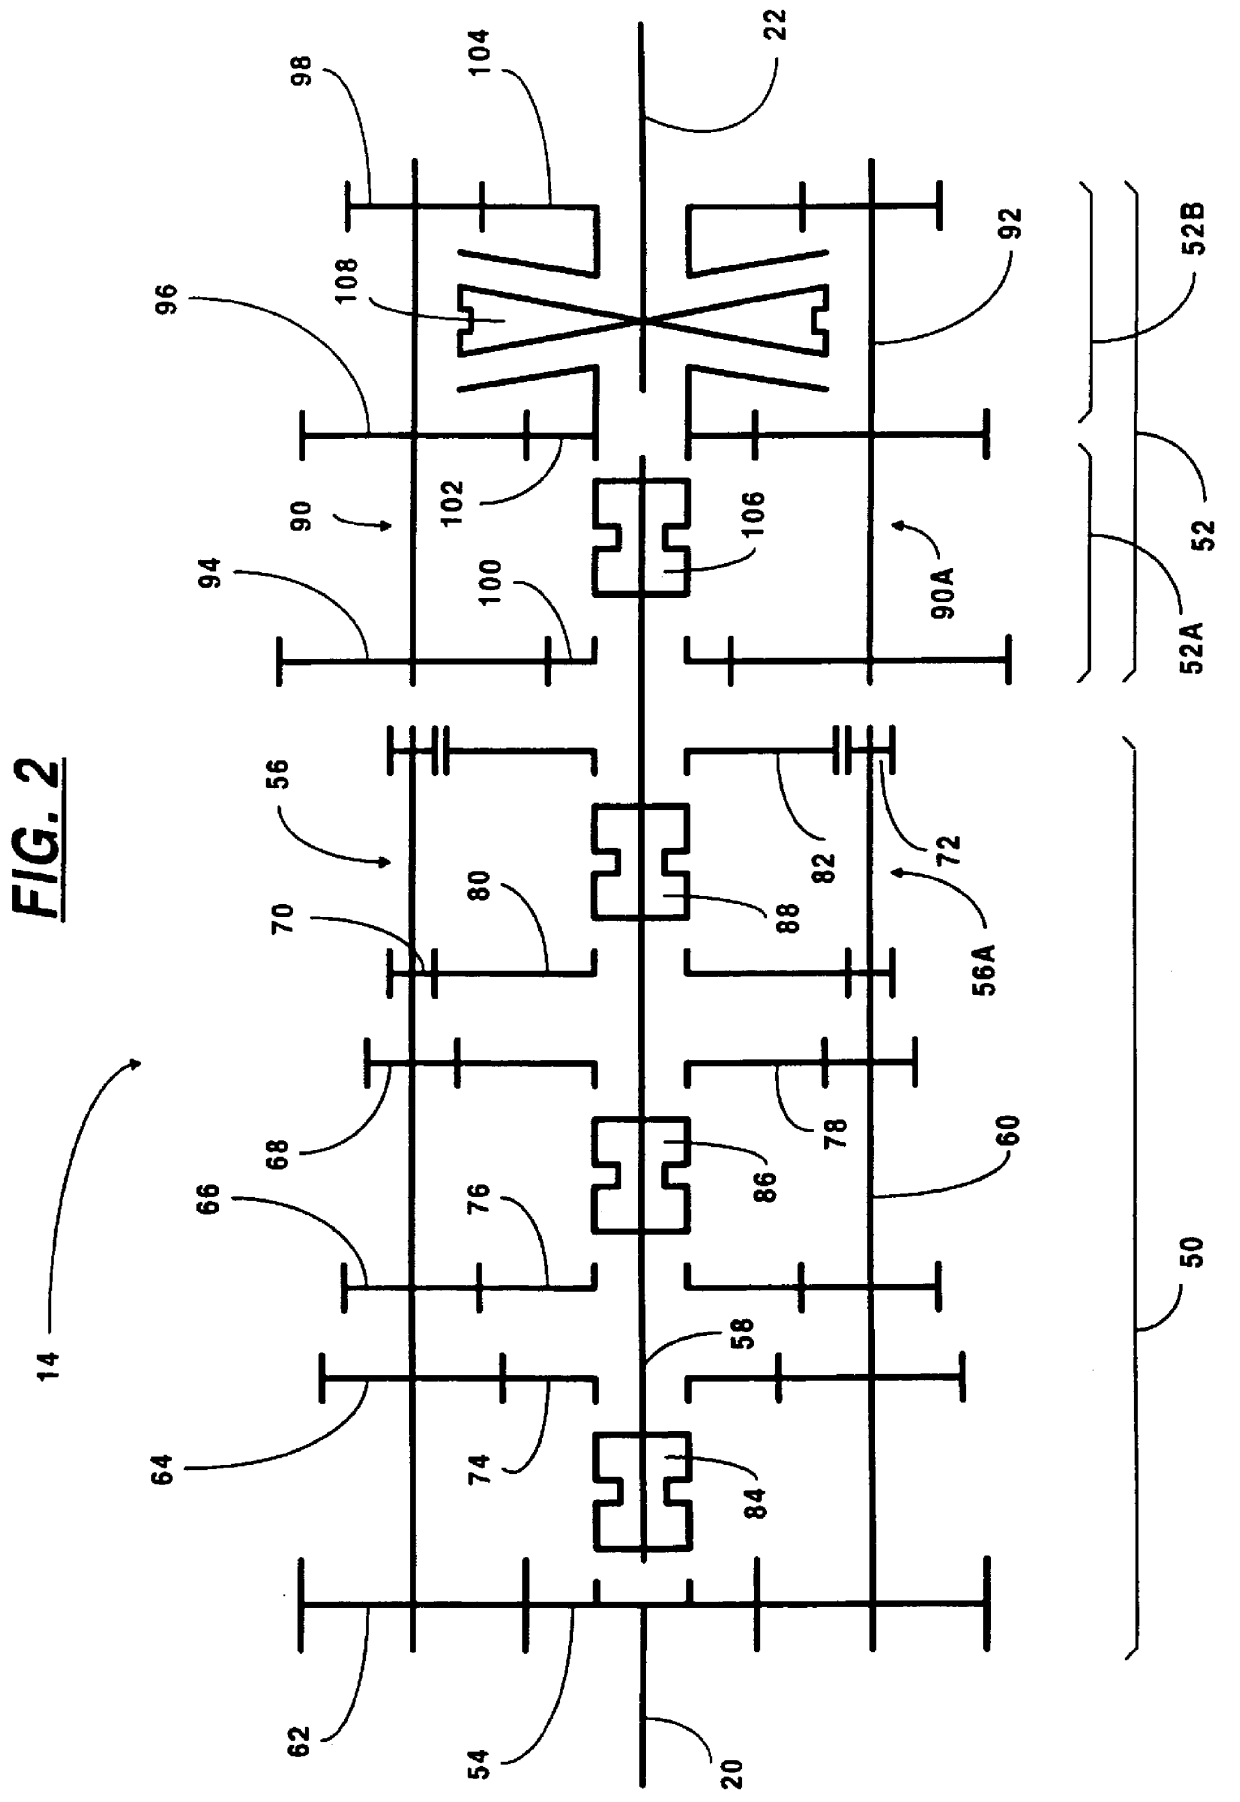 Mechanical transmission with reduced ratio steps in upper transmission ratios